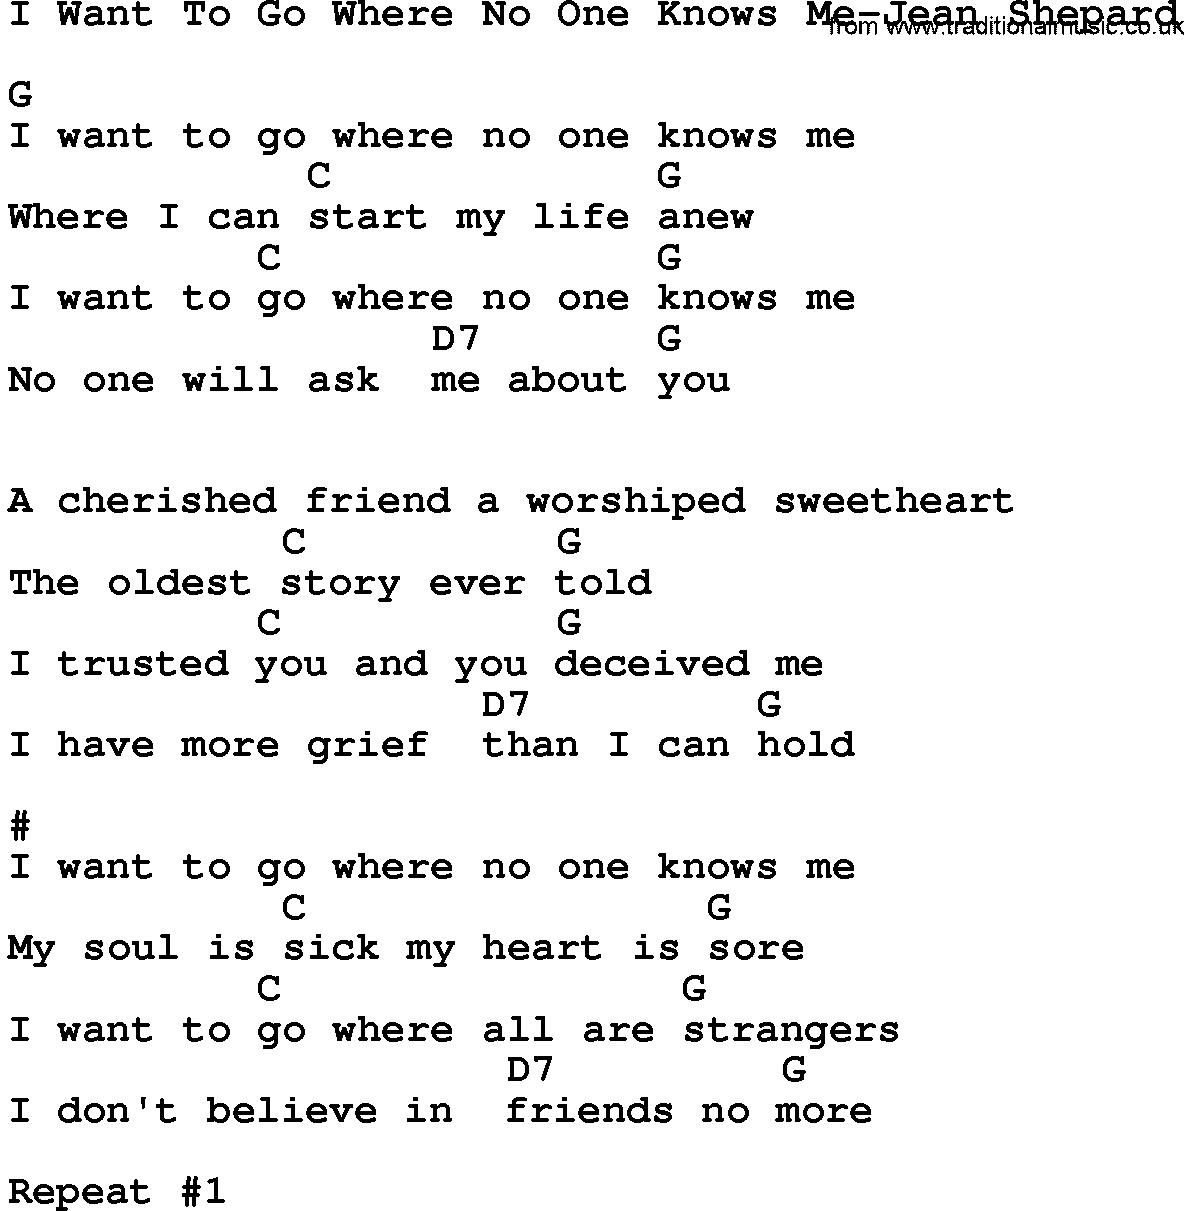 Country music song: I Want To Go Where No One Knows Me-Jean Shepard lyrics and chords